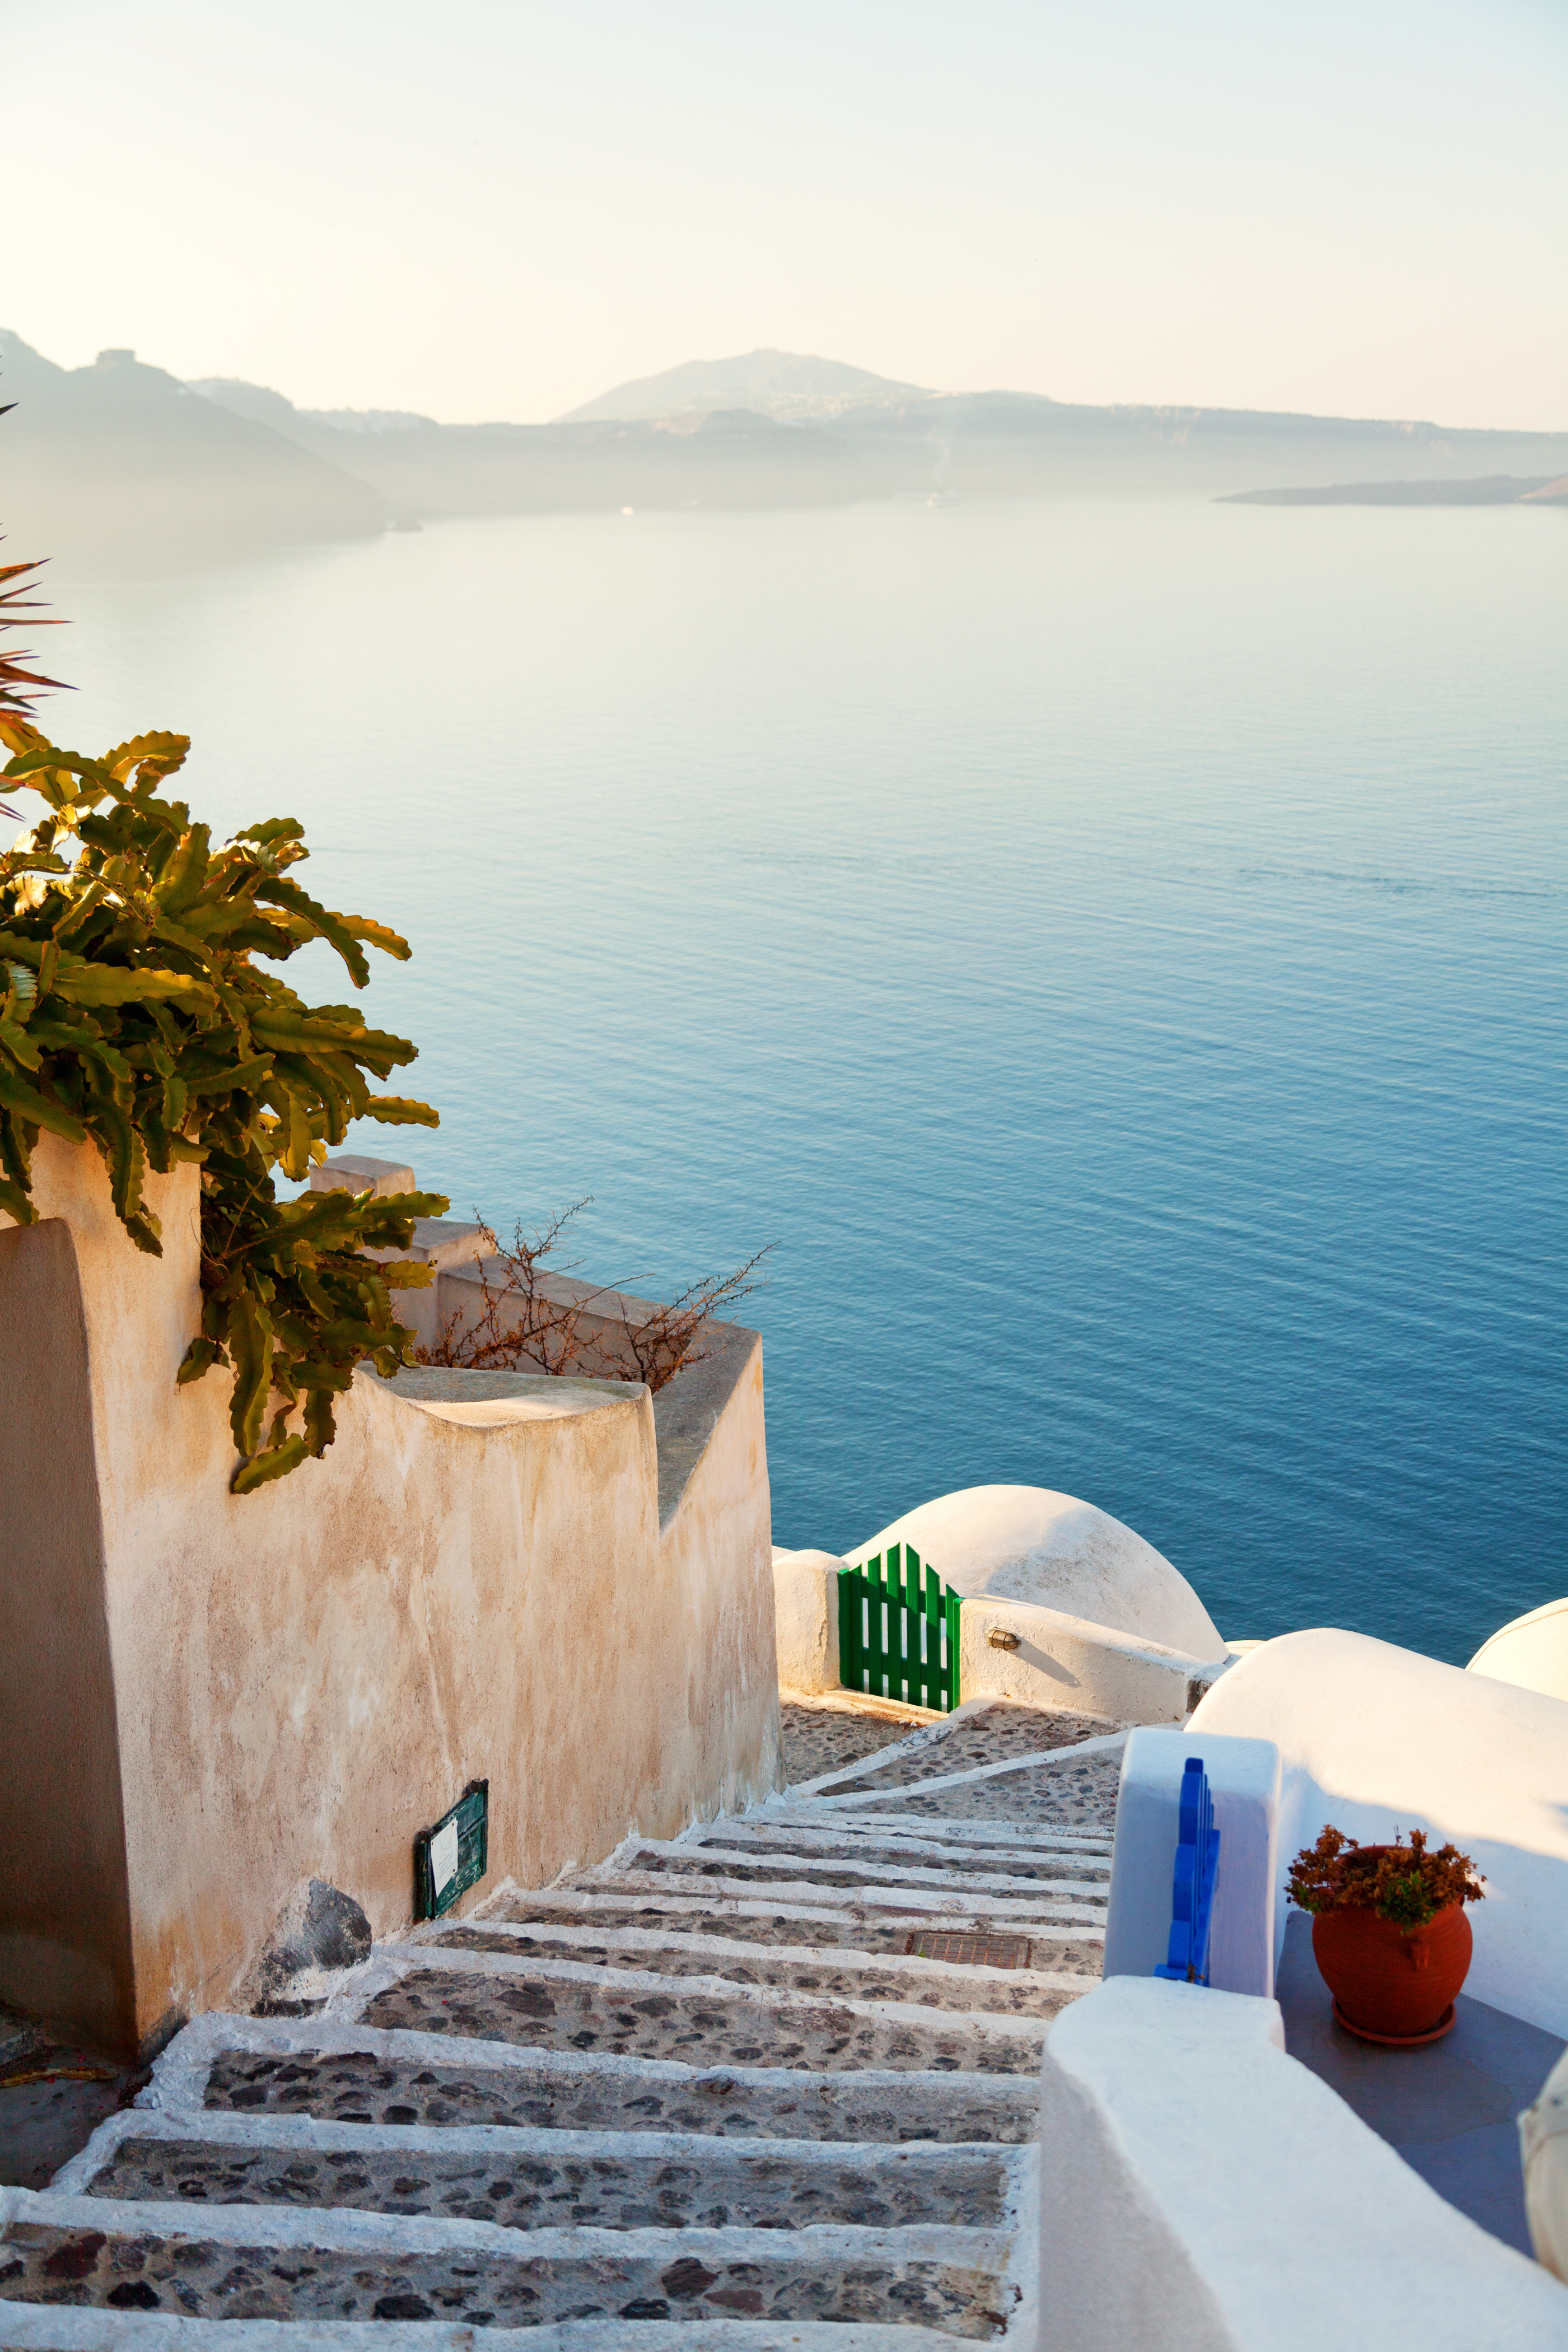 5 Most Instagrammable Locations in Greece